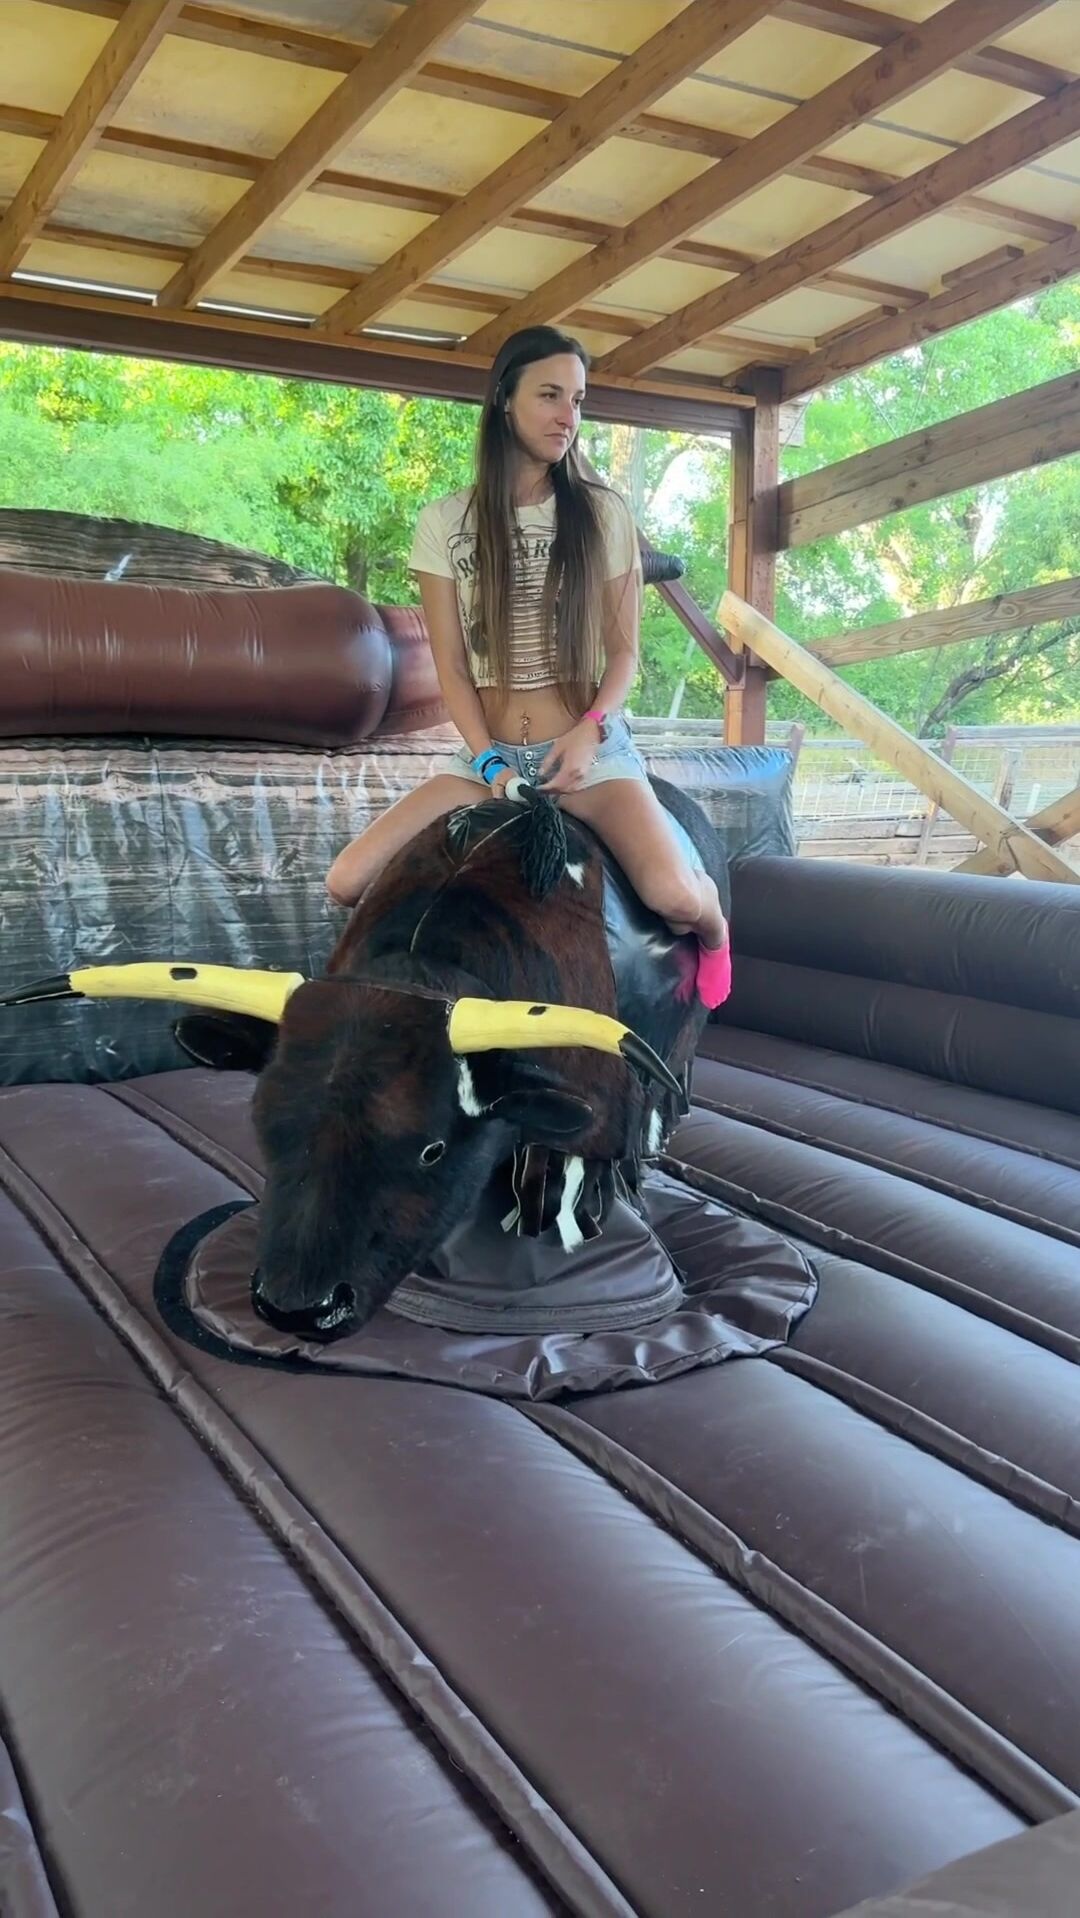 A.A OF - Riding The Bull